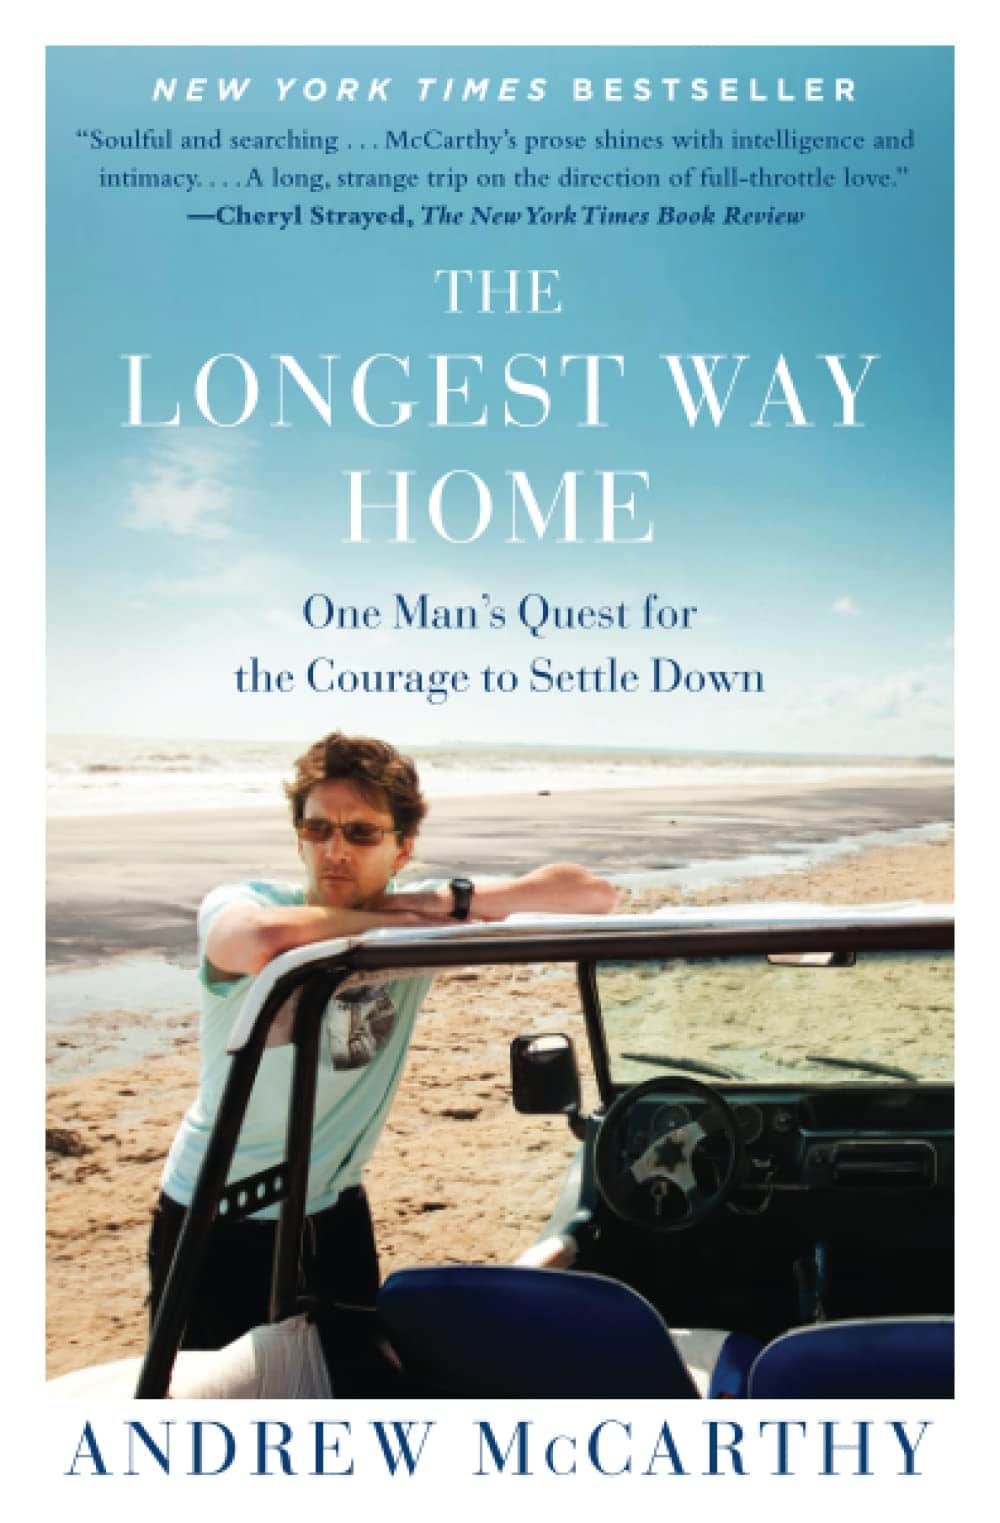 The Longest Way Home a travel memoir by Andrew McCarthy